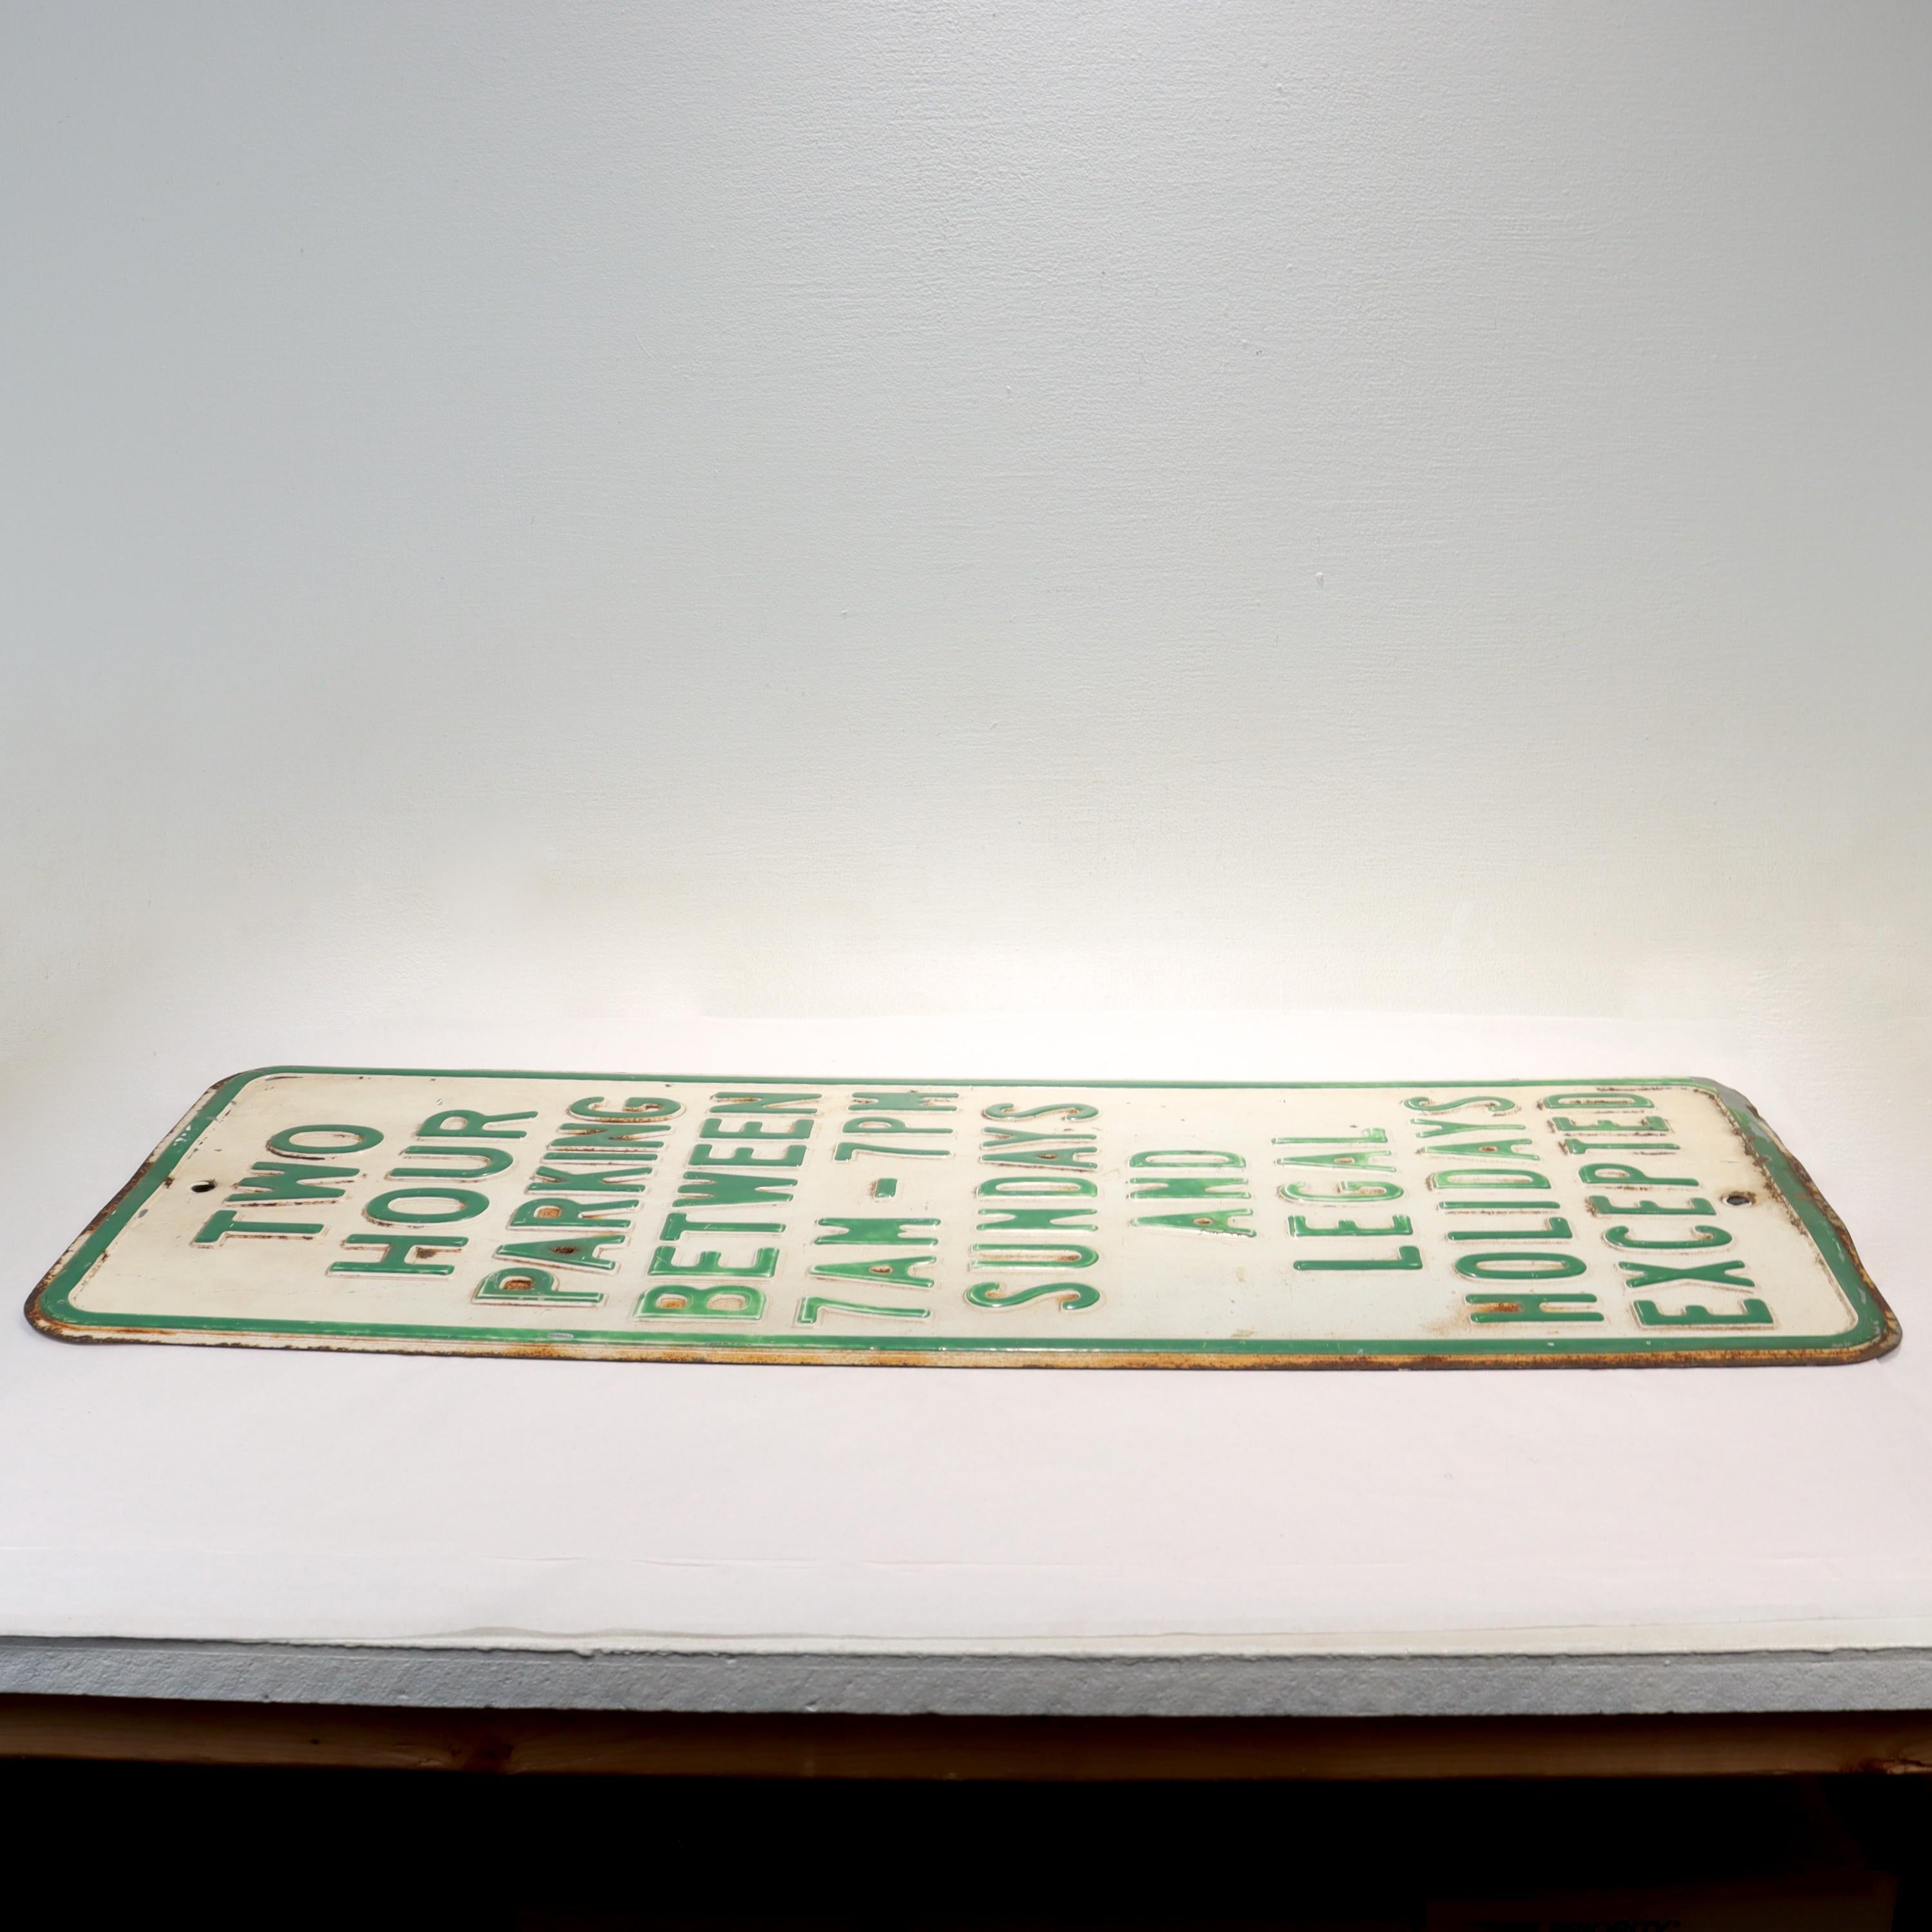 American 1960s, Green & White Painted Steel 'Two Hour Parking' Street Sign  For Sale